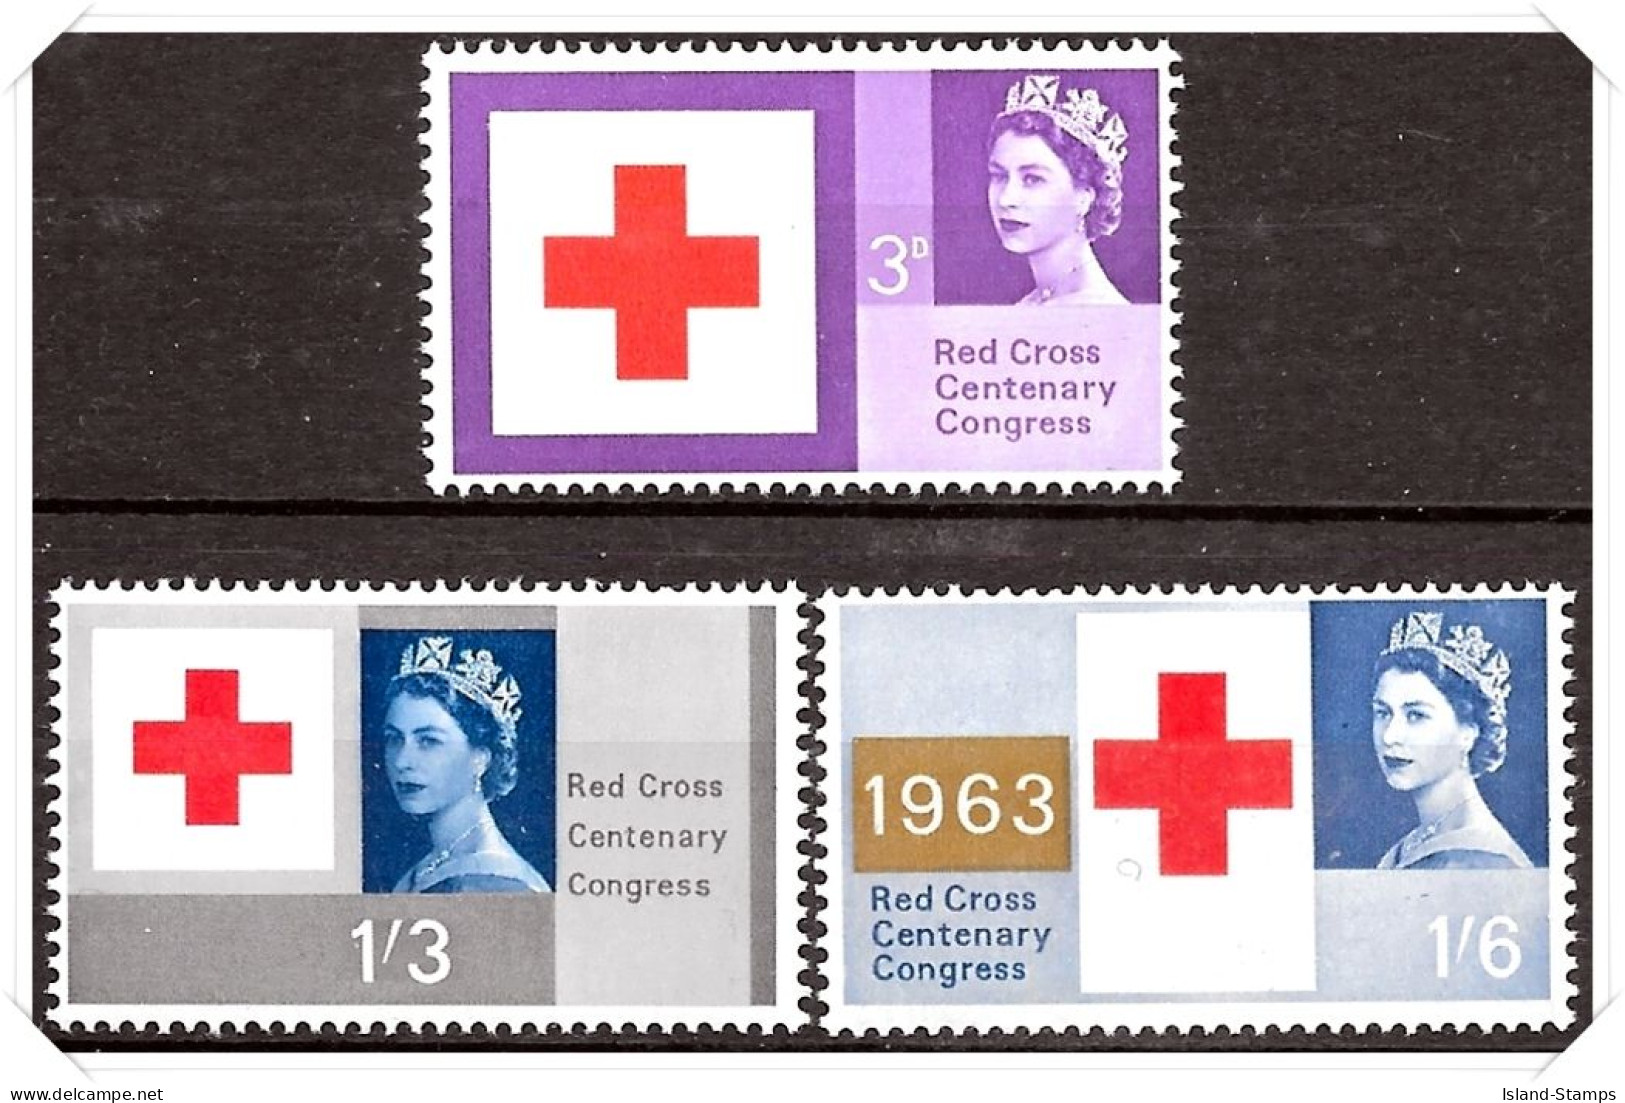 SG642-644 1963 Red Cross Centenary Congress Stamp Set (Ordinary) Unmounted Mint Hrd2a - Unused Stamps